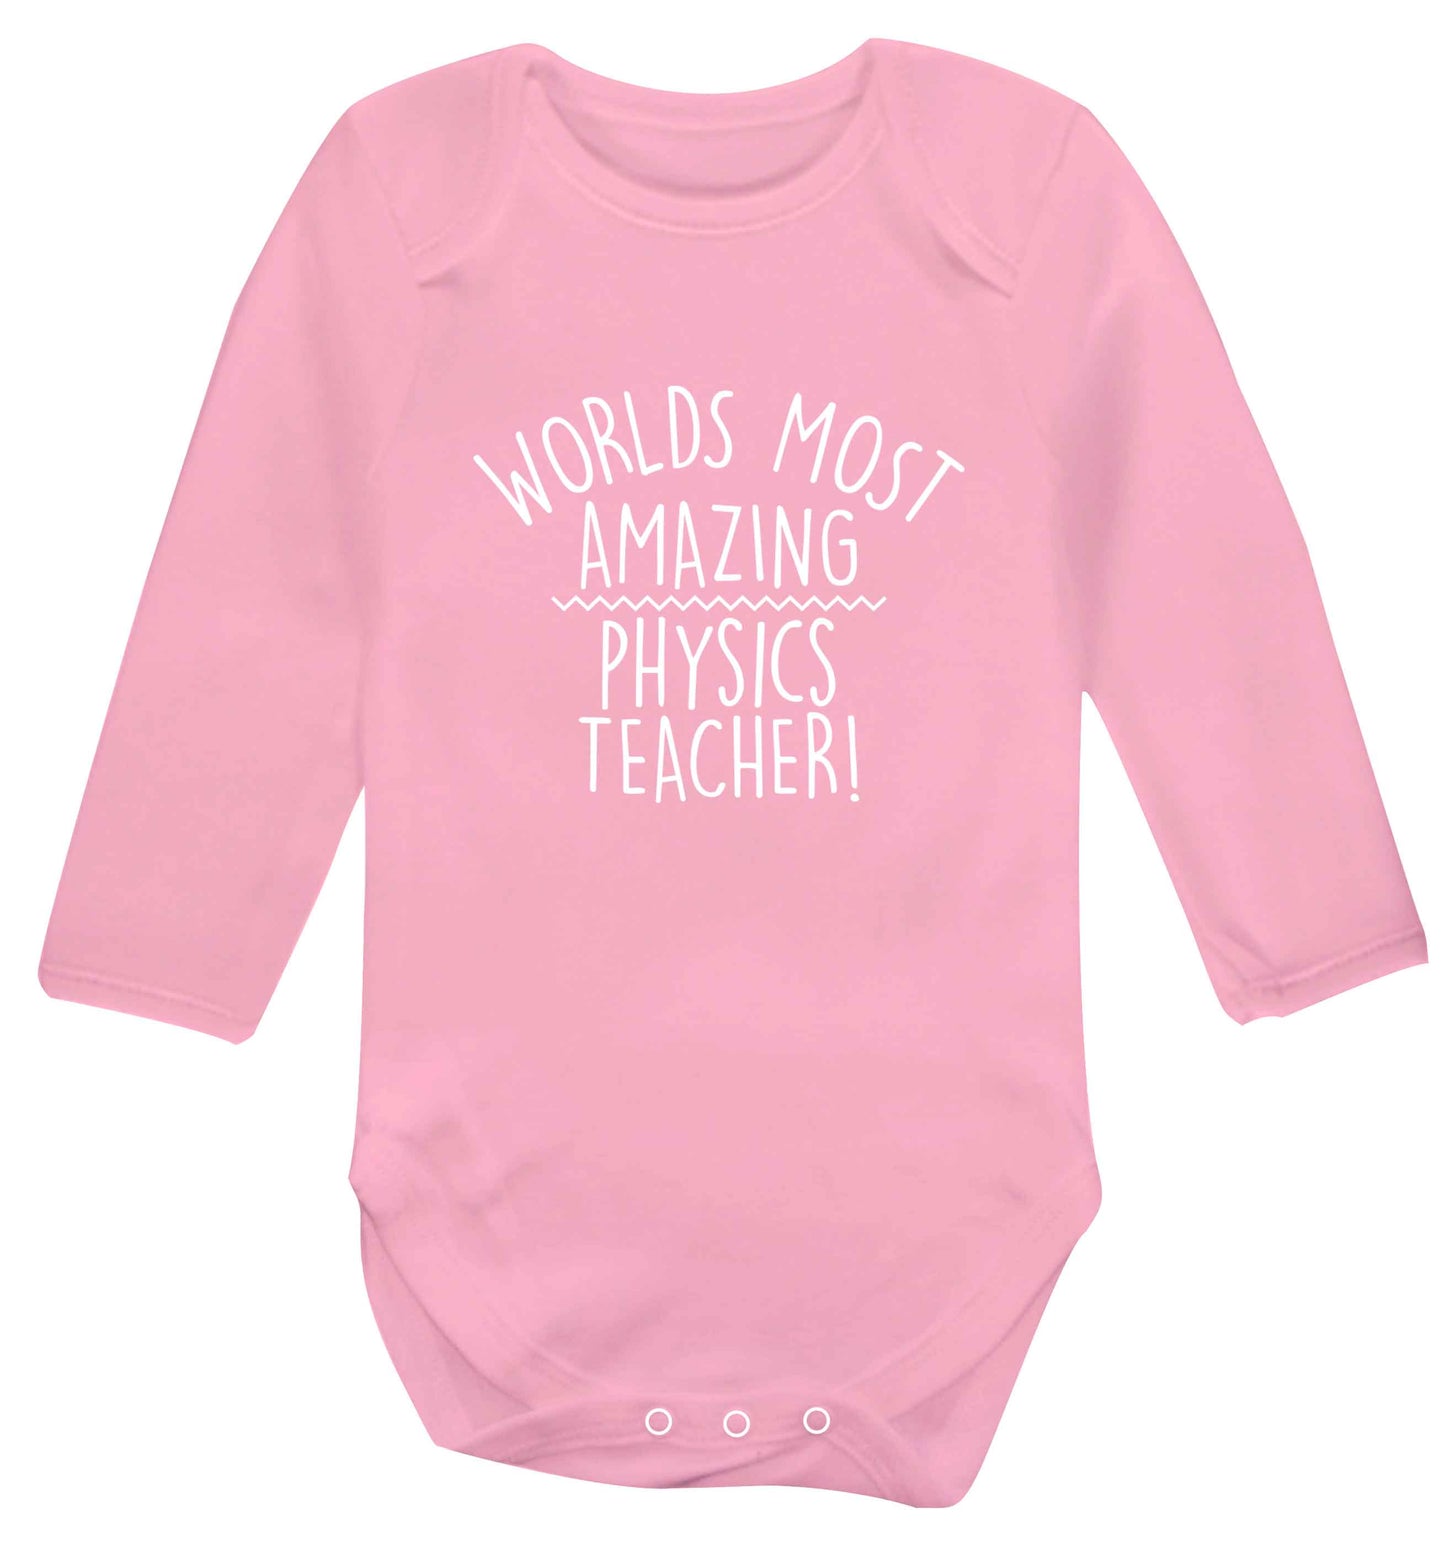 Worlds most amazing physics teacher baby vest long sleeved pale pink 6-12 months